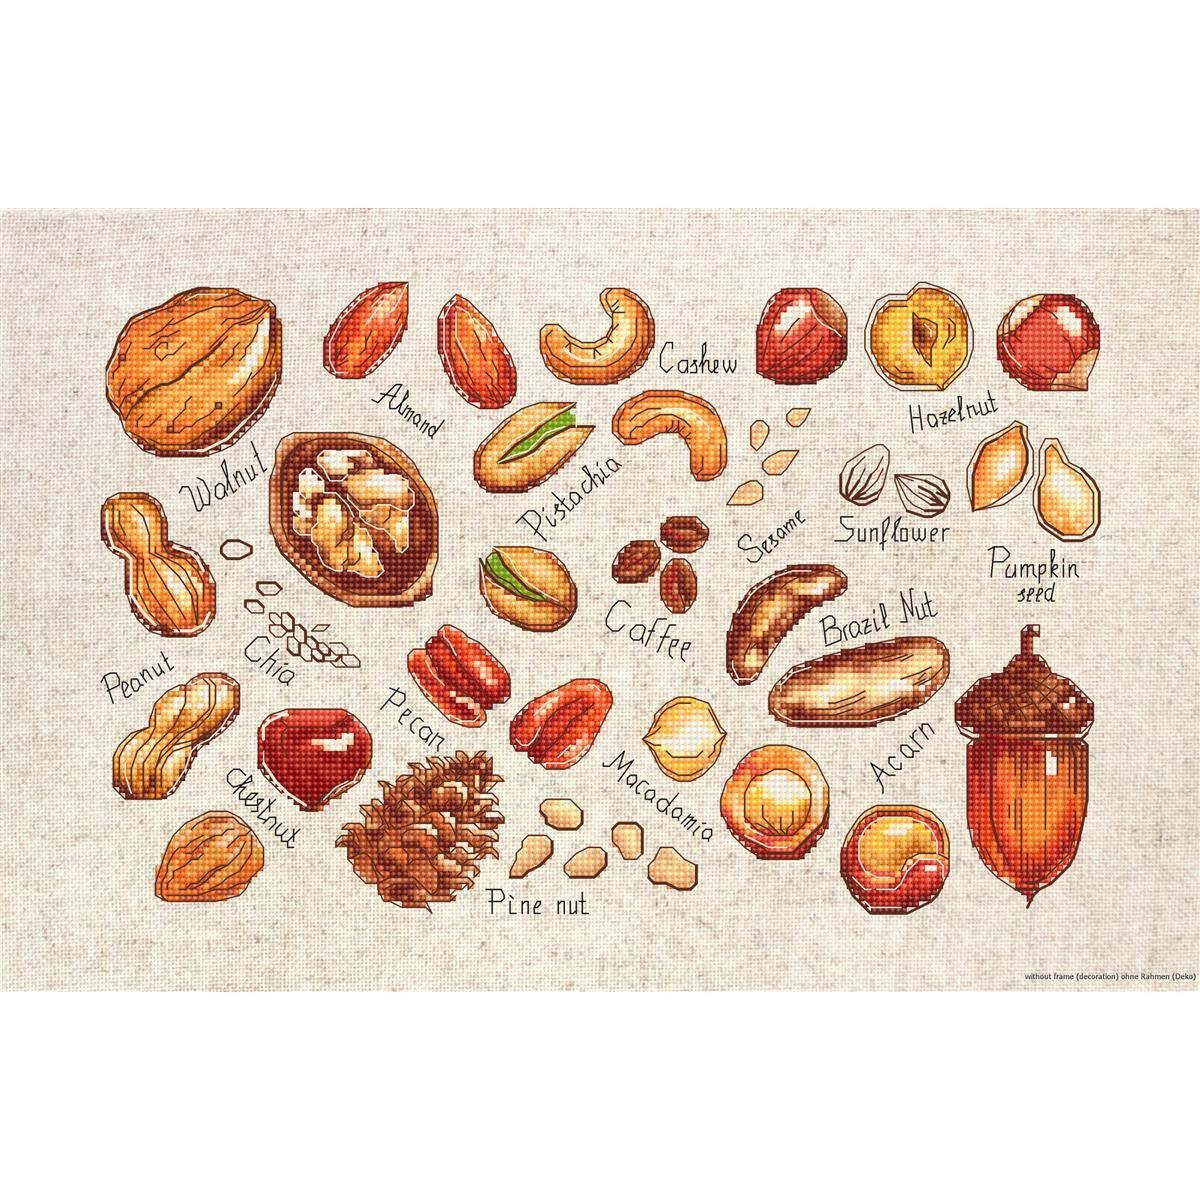 Luca-S counted Cross Stitch kit "Nuts and...